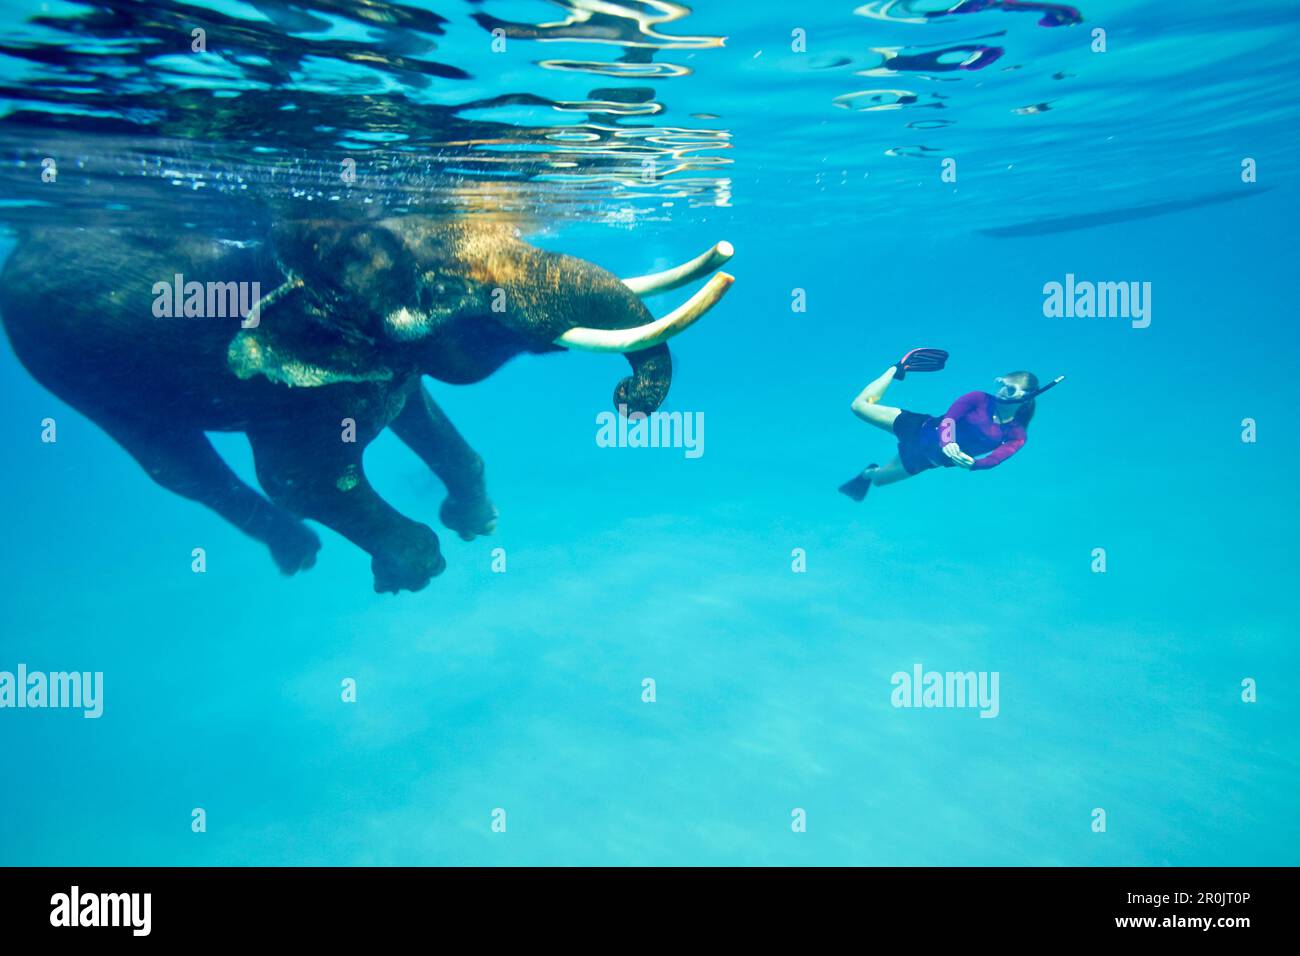 Swimming elephant Rajan, diver from the Barefoot Scuba Diving School accompanying him, at Beach No. 7, Havelock Island, Andaman Islands, Union Territo Stock Photo